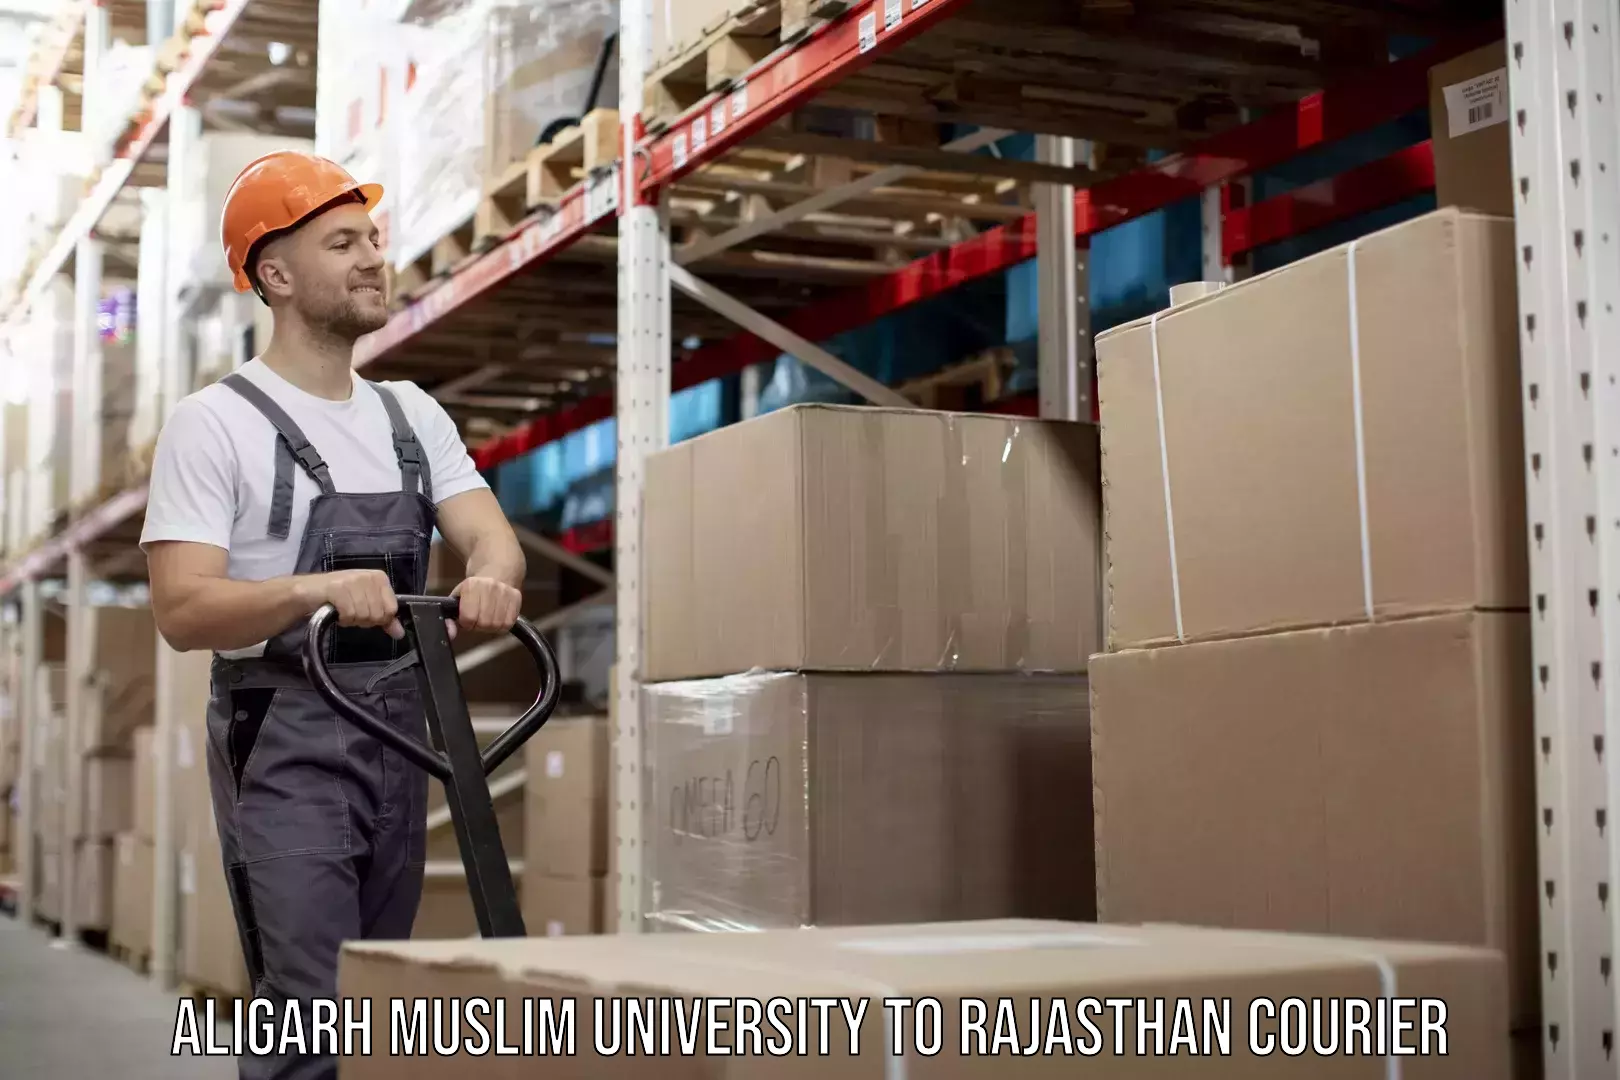 Global shipping networks Aligarh Muslim University to Rajasthan